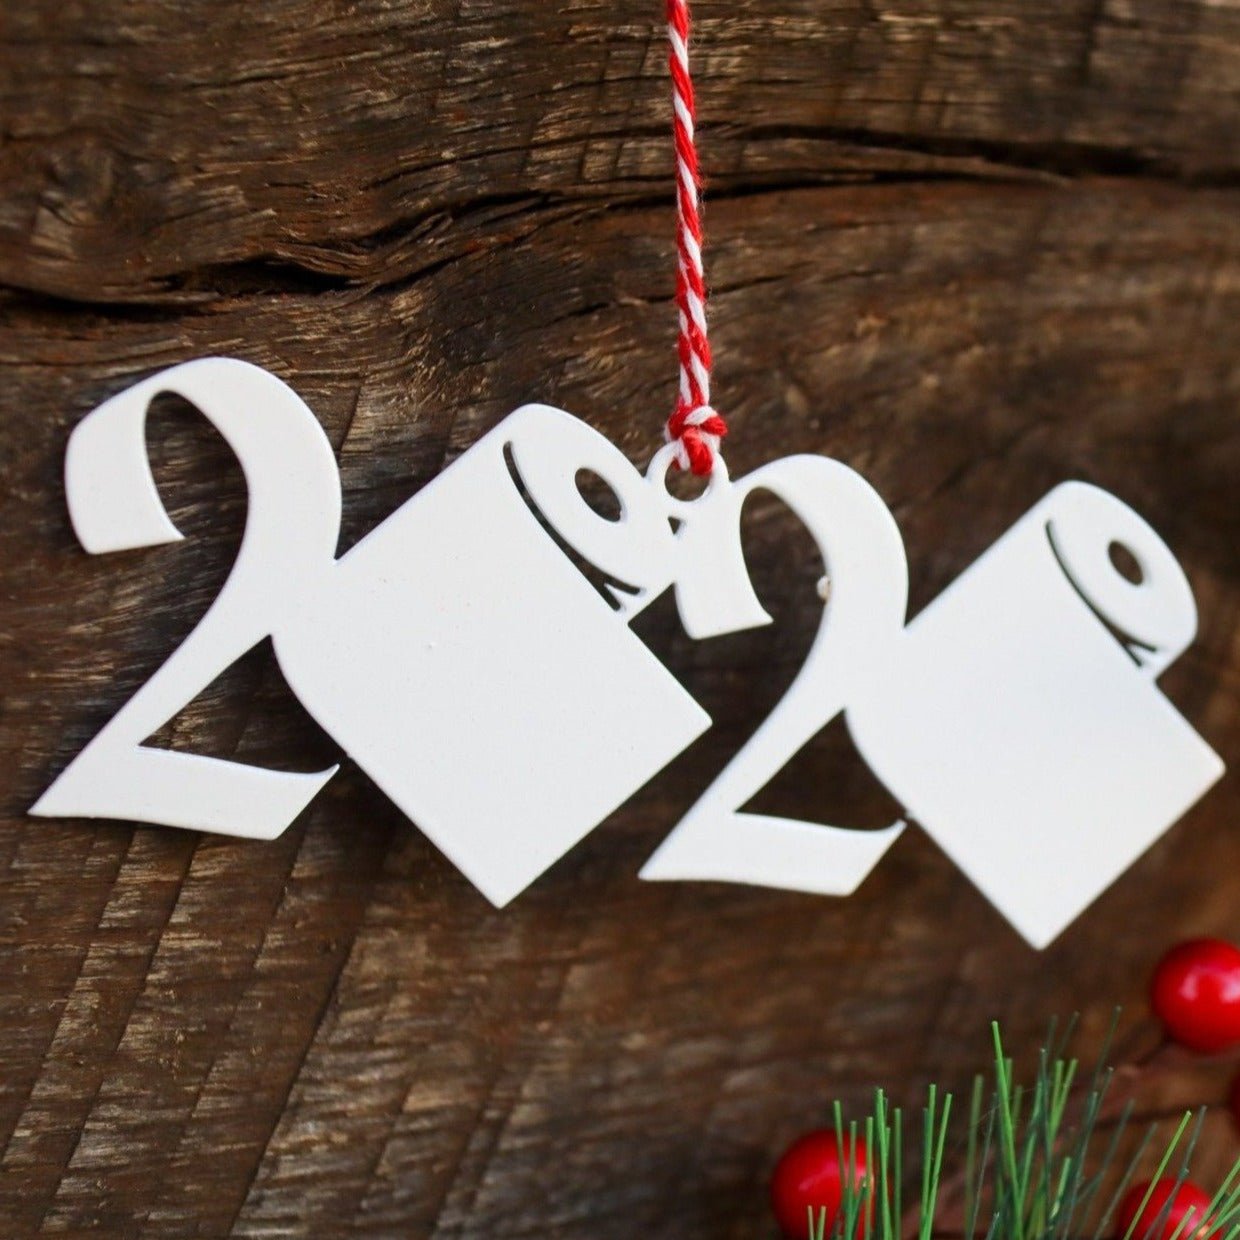 2020 Toilet Paper Christmas Ornament - Funny Holiday Stocking Stuffer Gift - Tree Home Decor - Maker Table